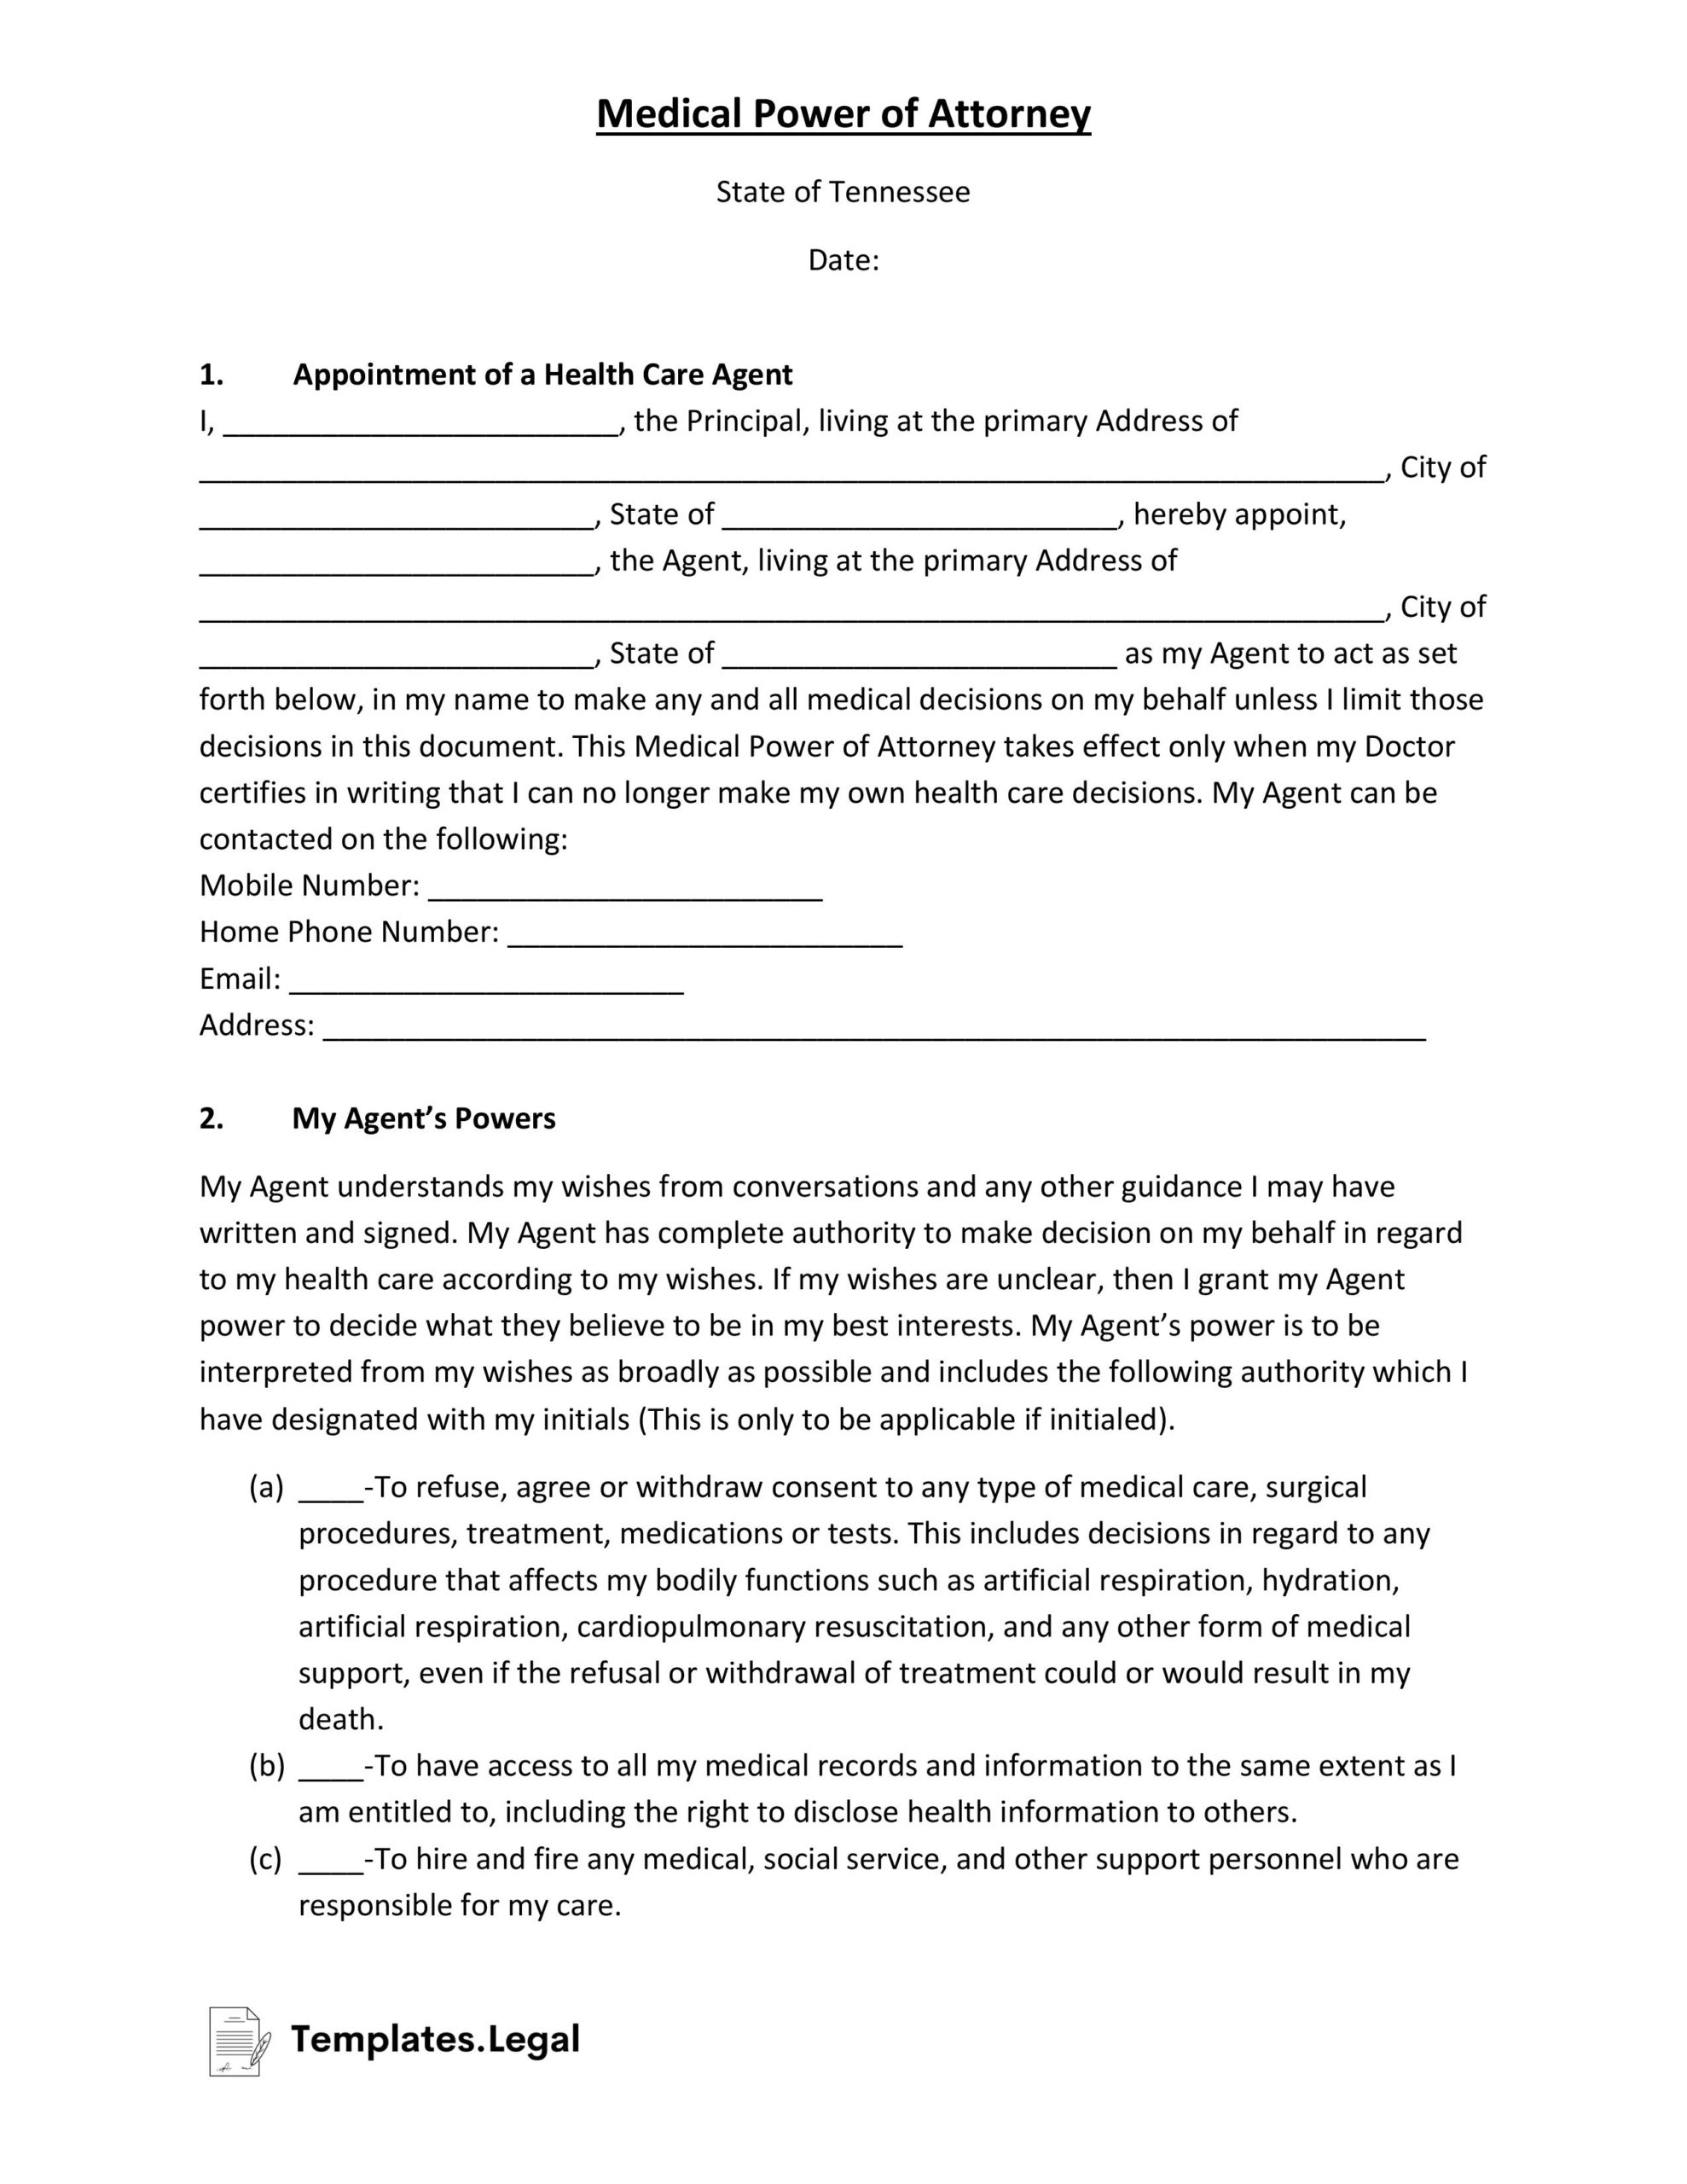 Tennessee Medical Power of Attorney- Templates.Legal